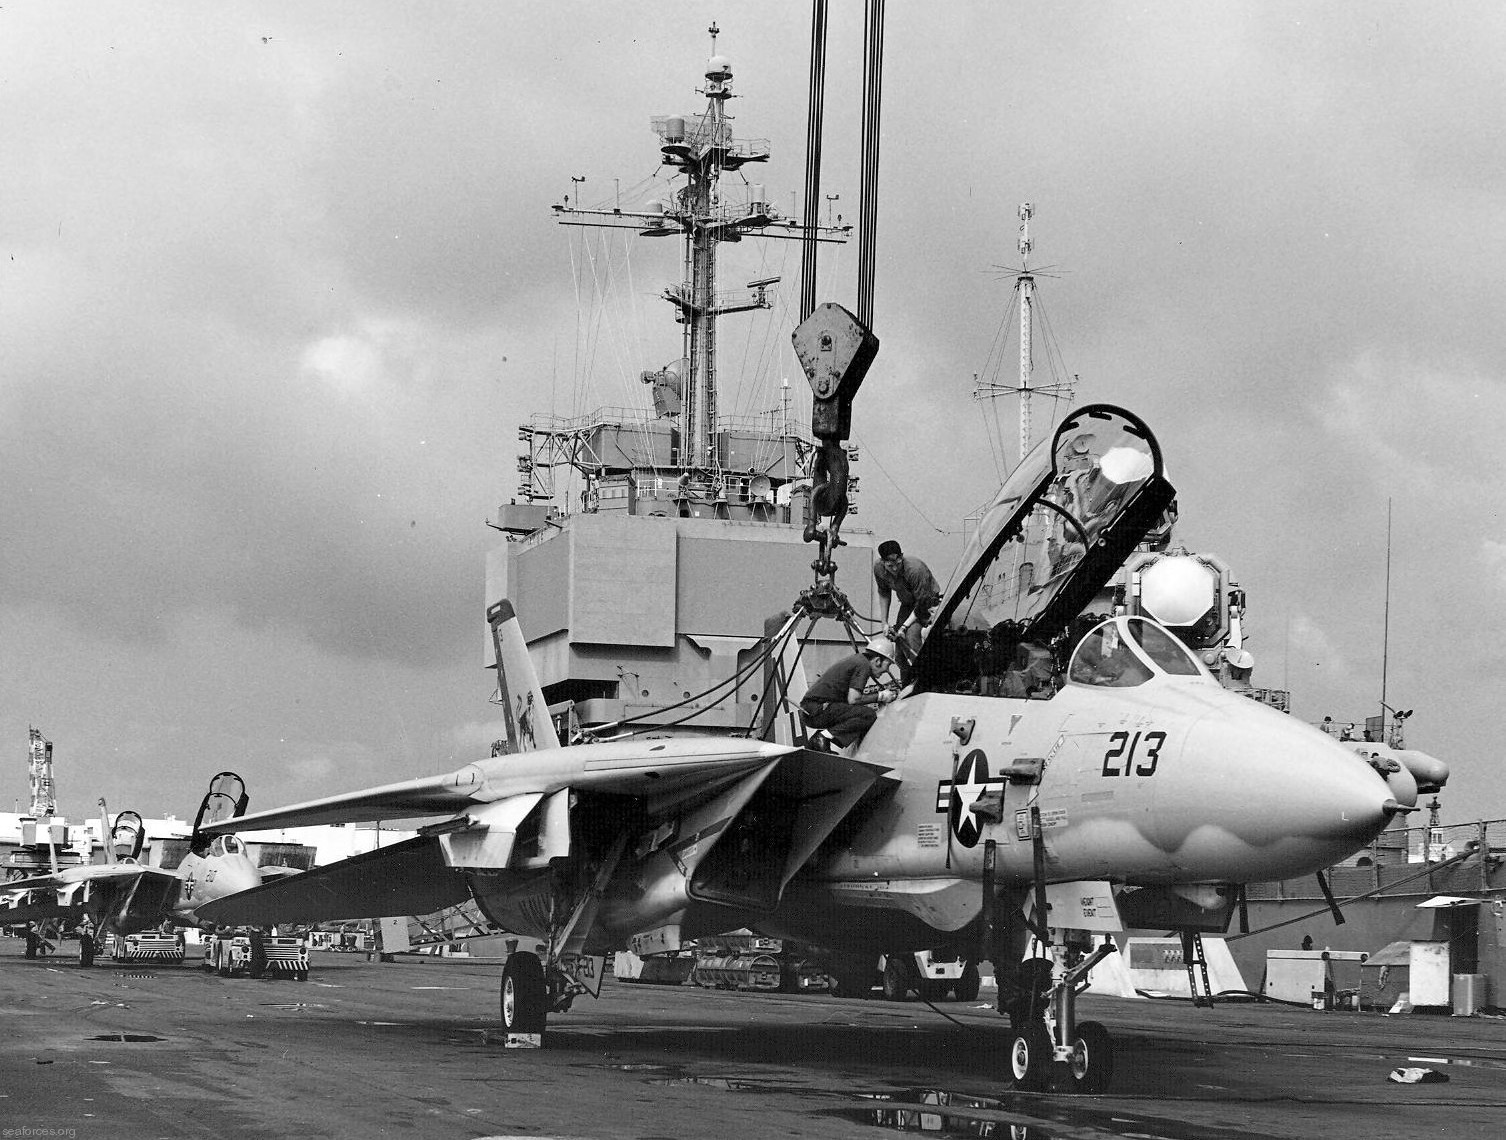 vf-213 black lions fighter squadron us navy f-14a tomcat carrier air wing cvw-11 uss kitty hawk cv-63 106